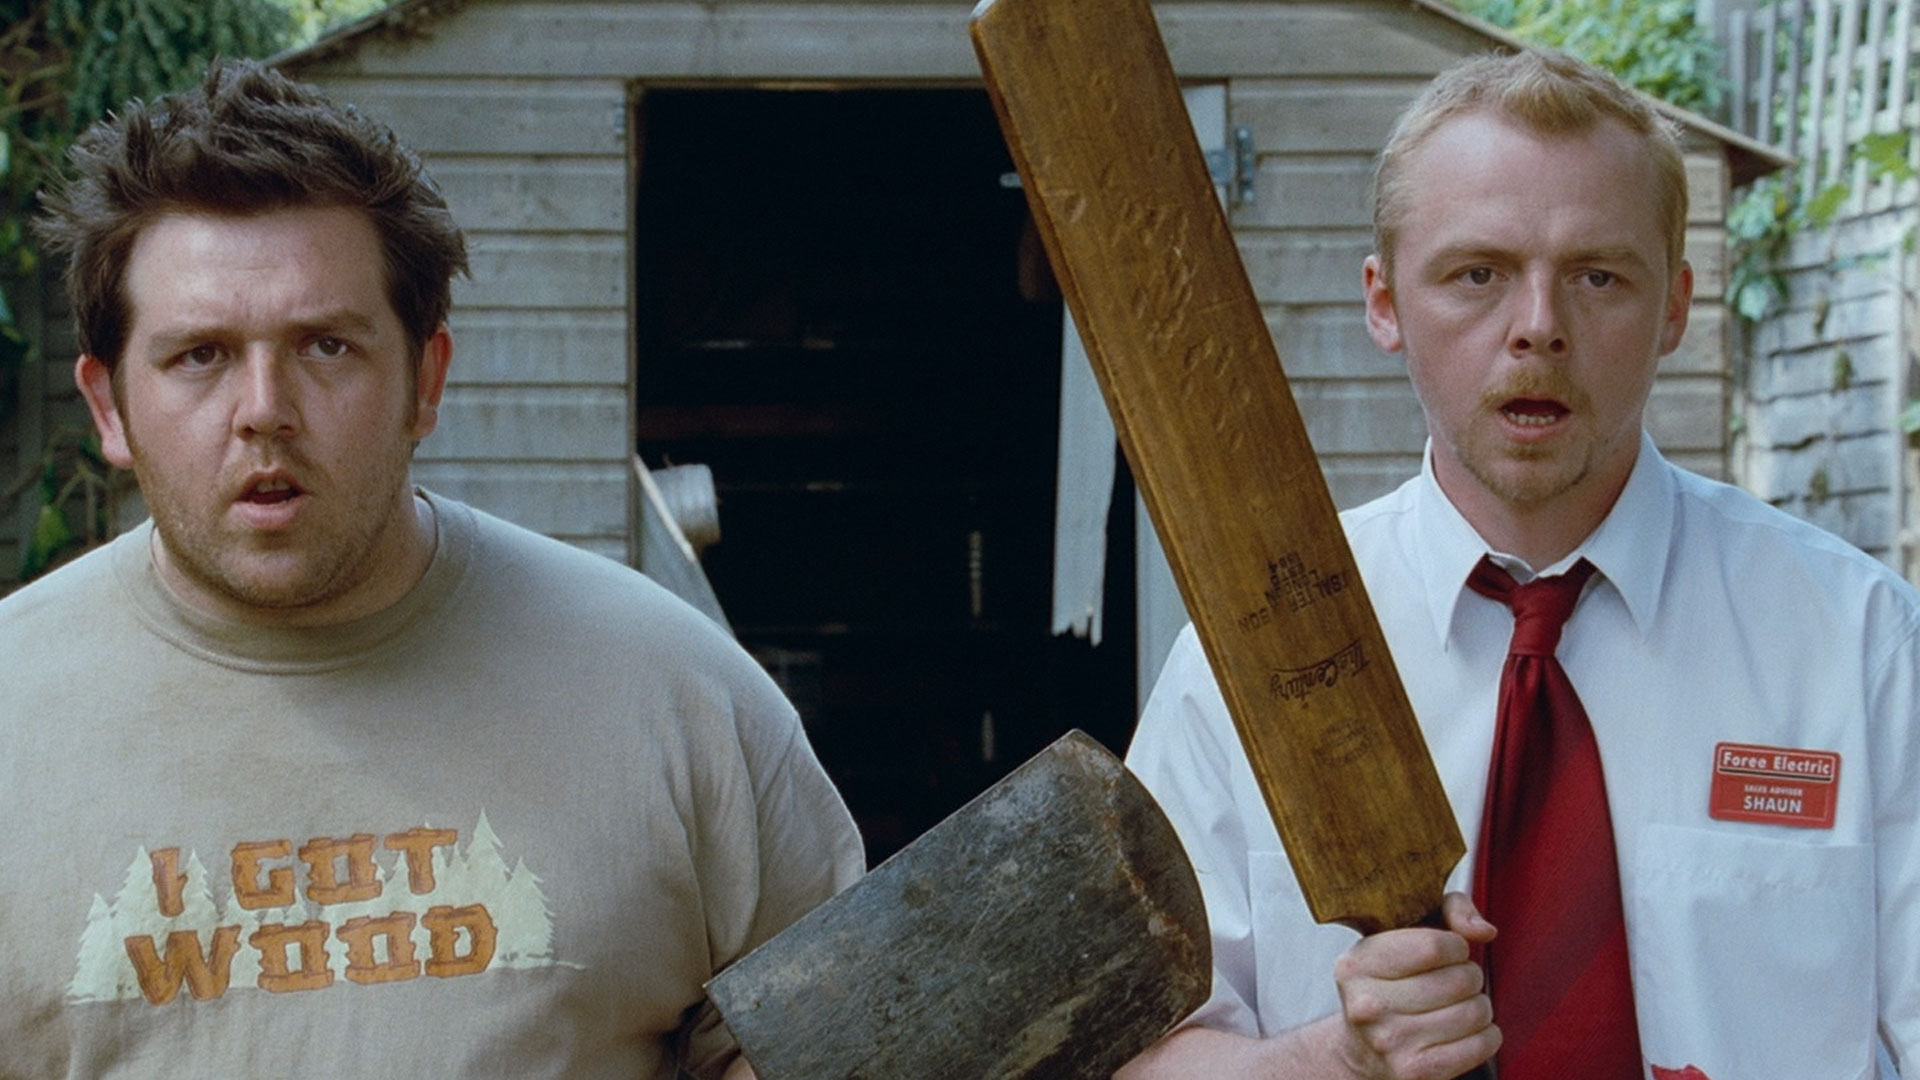 Shaun of the Dead (2004) - Shaun (Simon Pegg) is a middle-aged electronic store sales associate trying to hold on to his job, girlfriend and sanity. Ed (Nick Frost) is Shaun’s deadbeat, weed selling friend who lives on the couch and gets mostly in the way of things. When a zombie outbreak hits London, Shaun and Ed have to team up to save Shaun’s girlfriend, his mother and their friends. This horror/comedy has so many great jokes and tips of the hat to classic zombie films, it’s amazing it isn’t more well regarded.